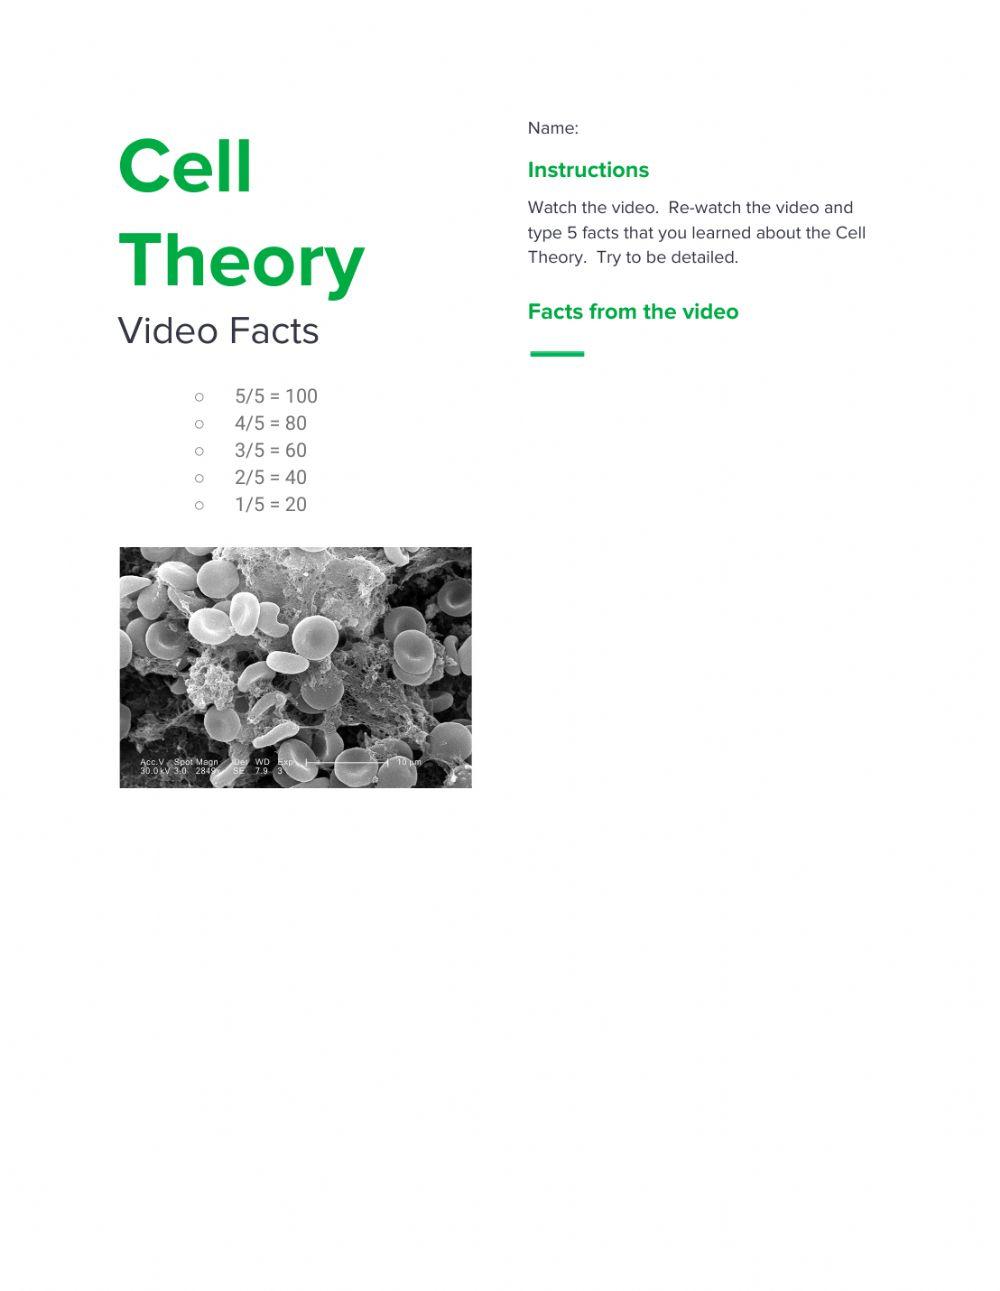 Cell Theory Video Facts